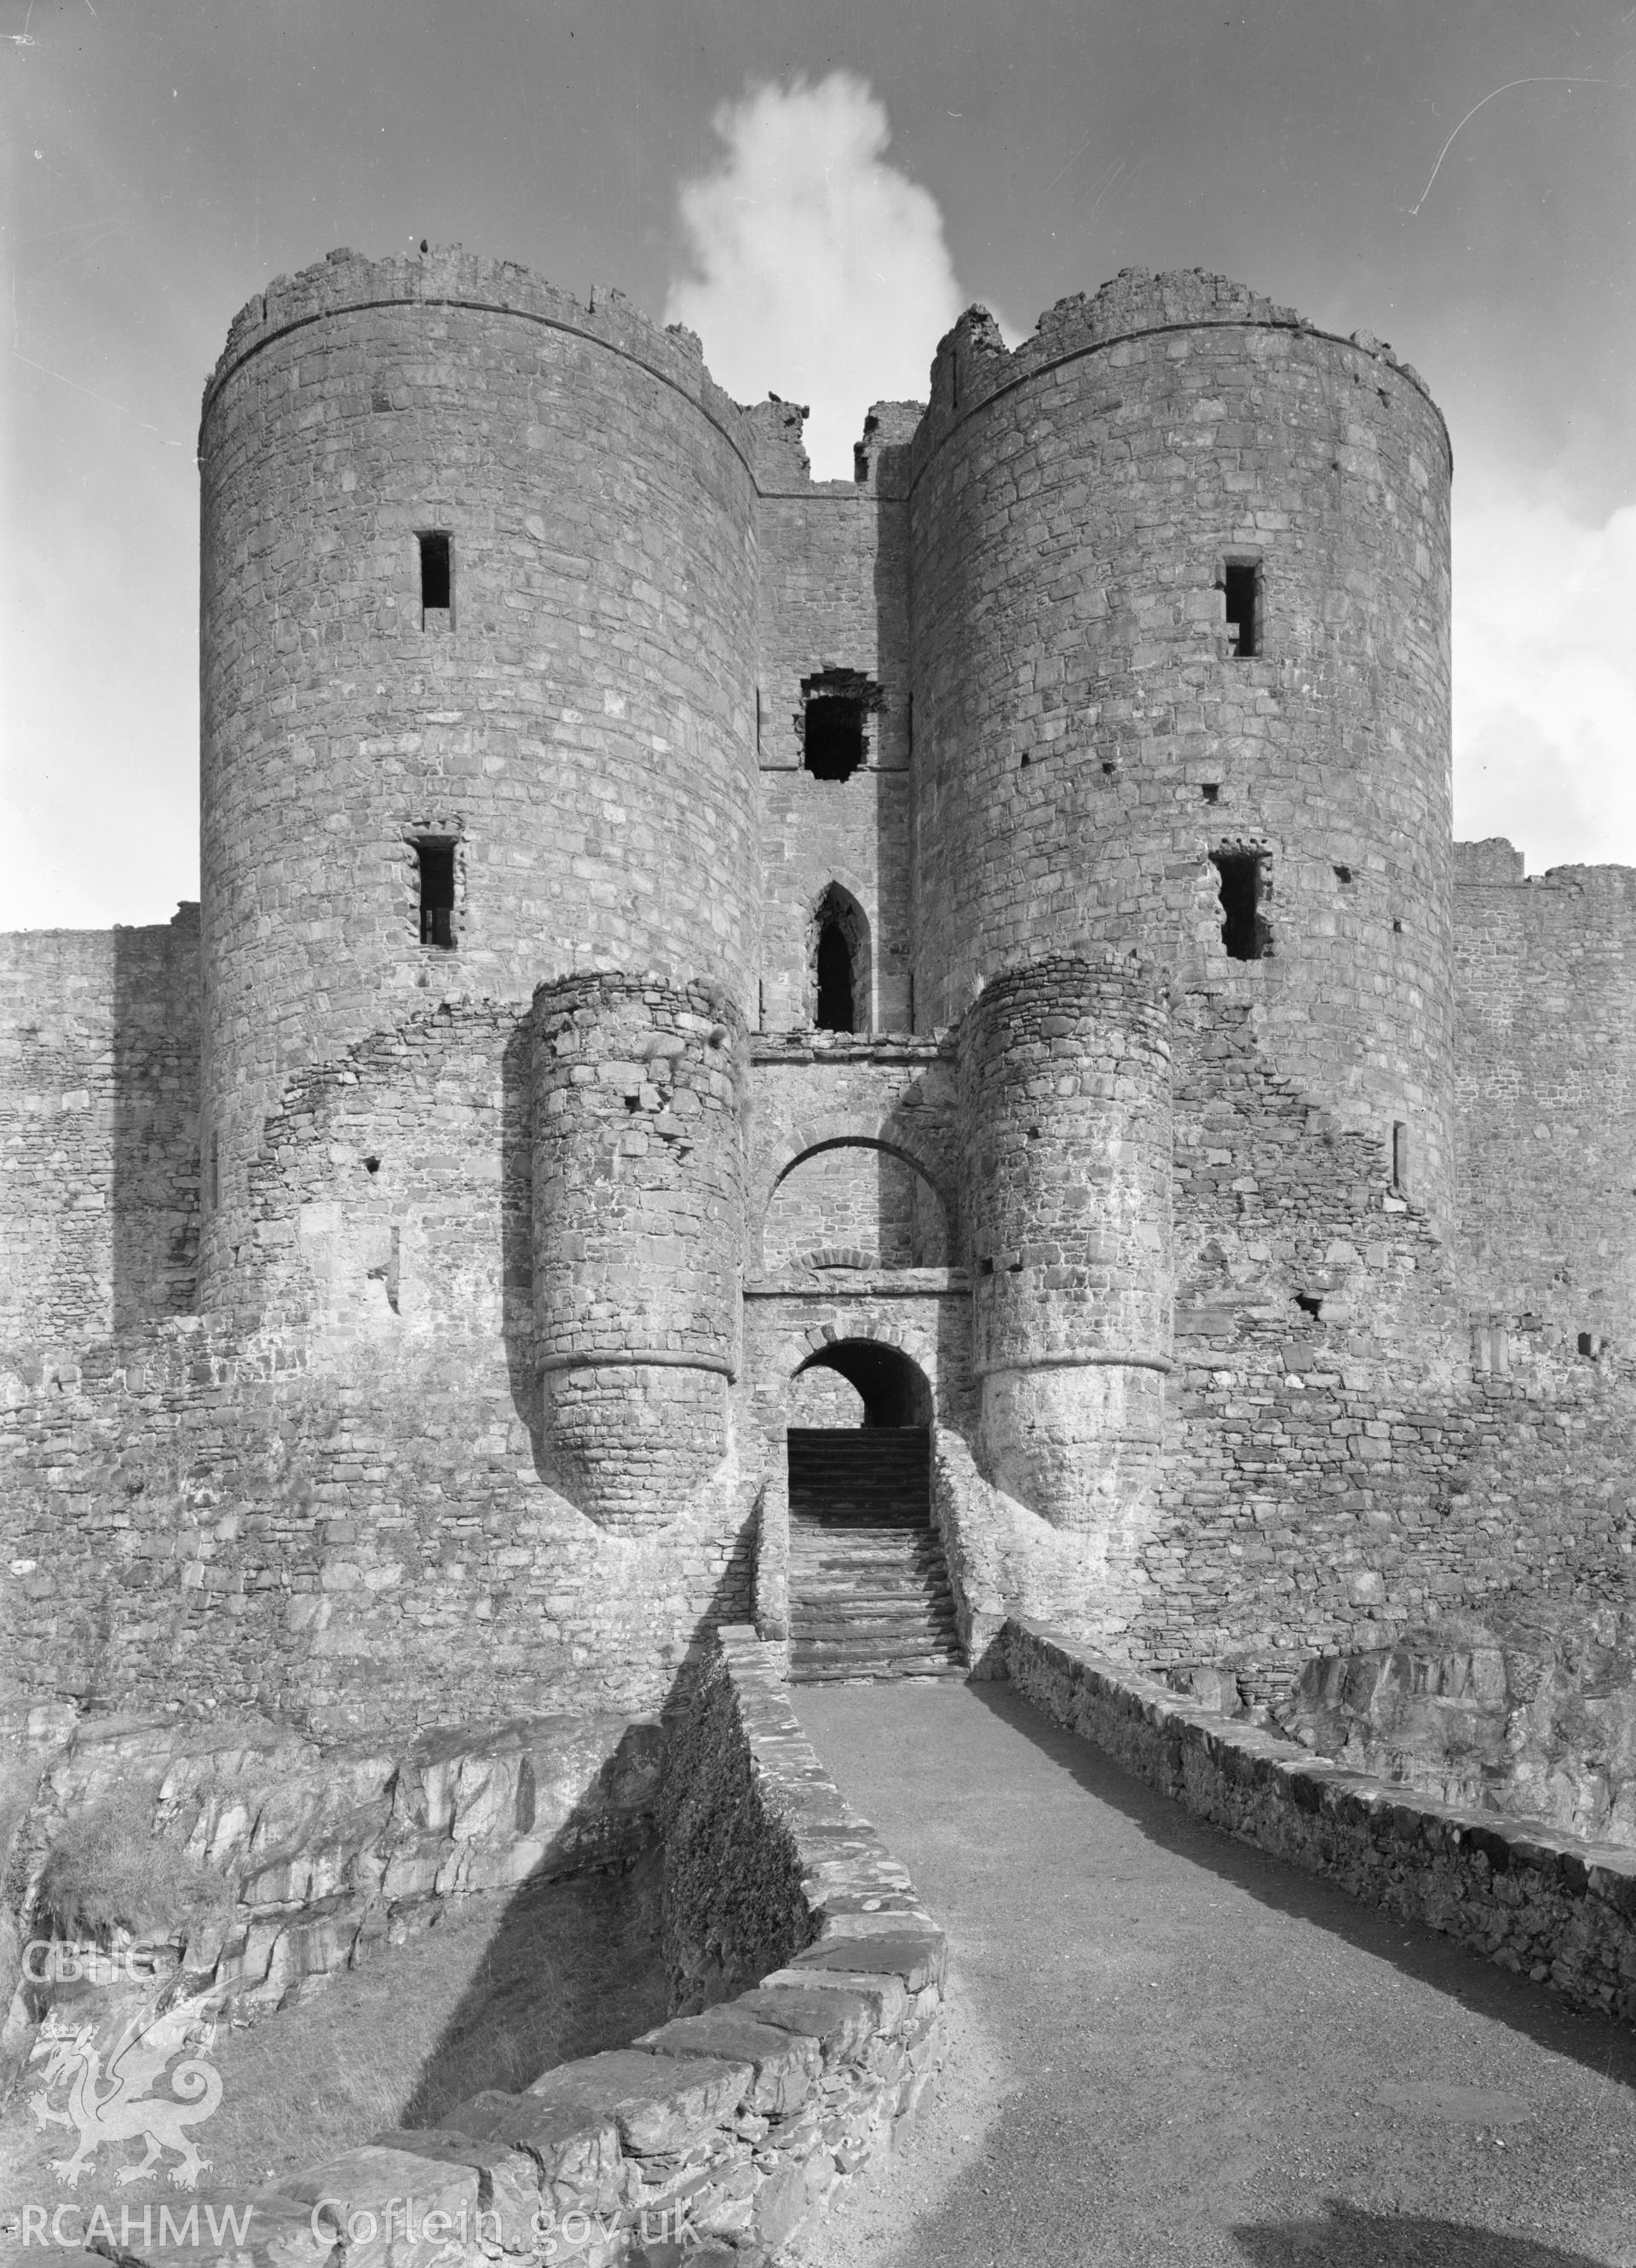 Digital copy of a nitrate negative showing view of Harlech Castle.